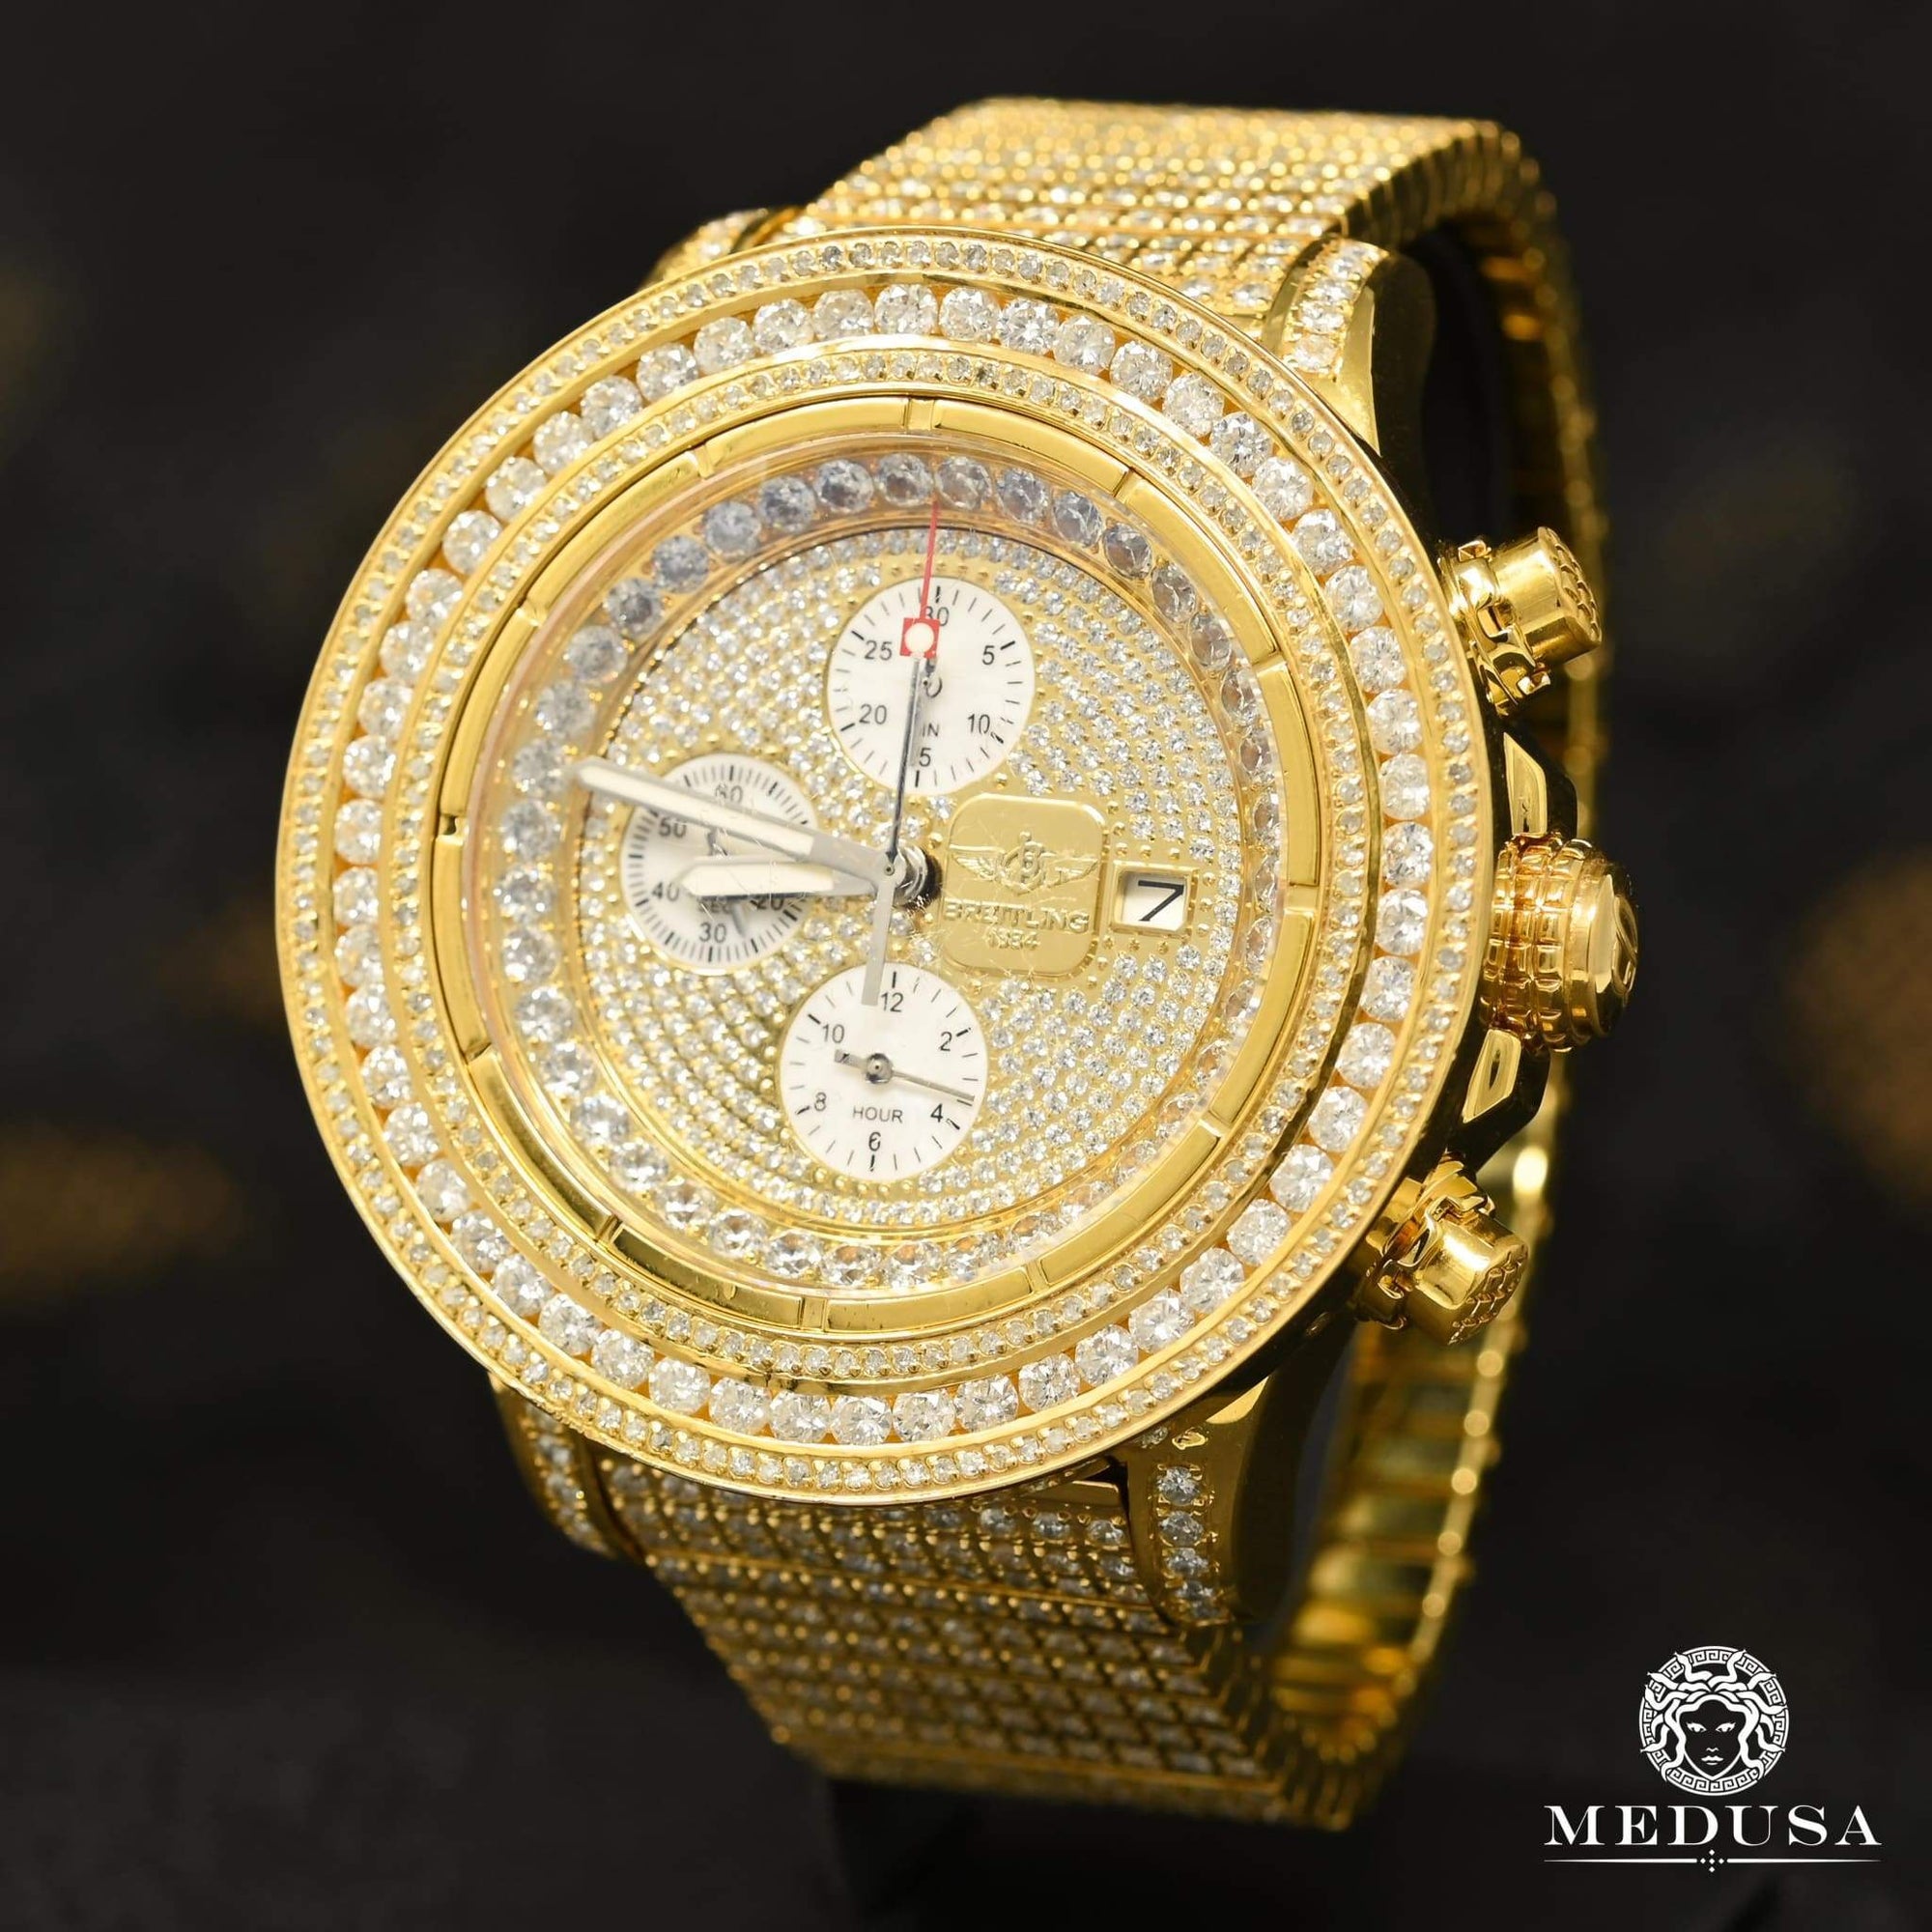 Breitling Watch | Breitling Super Avenger Men's Watch - Gold Iced Out Gold